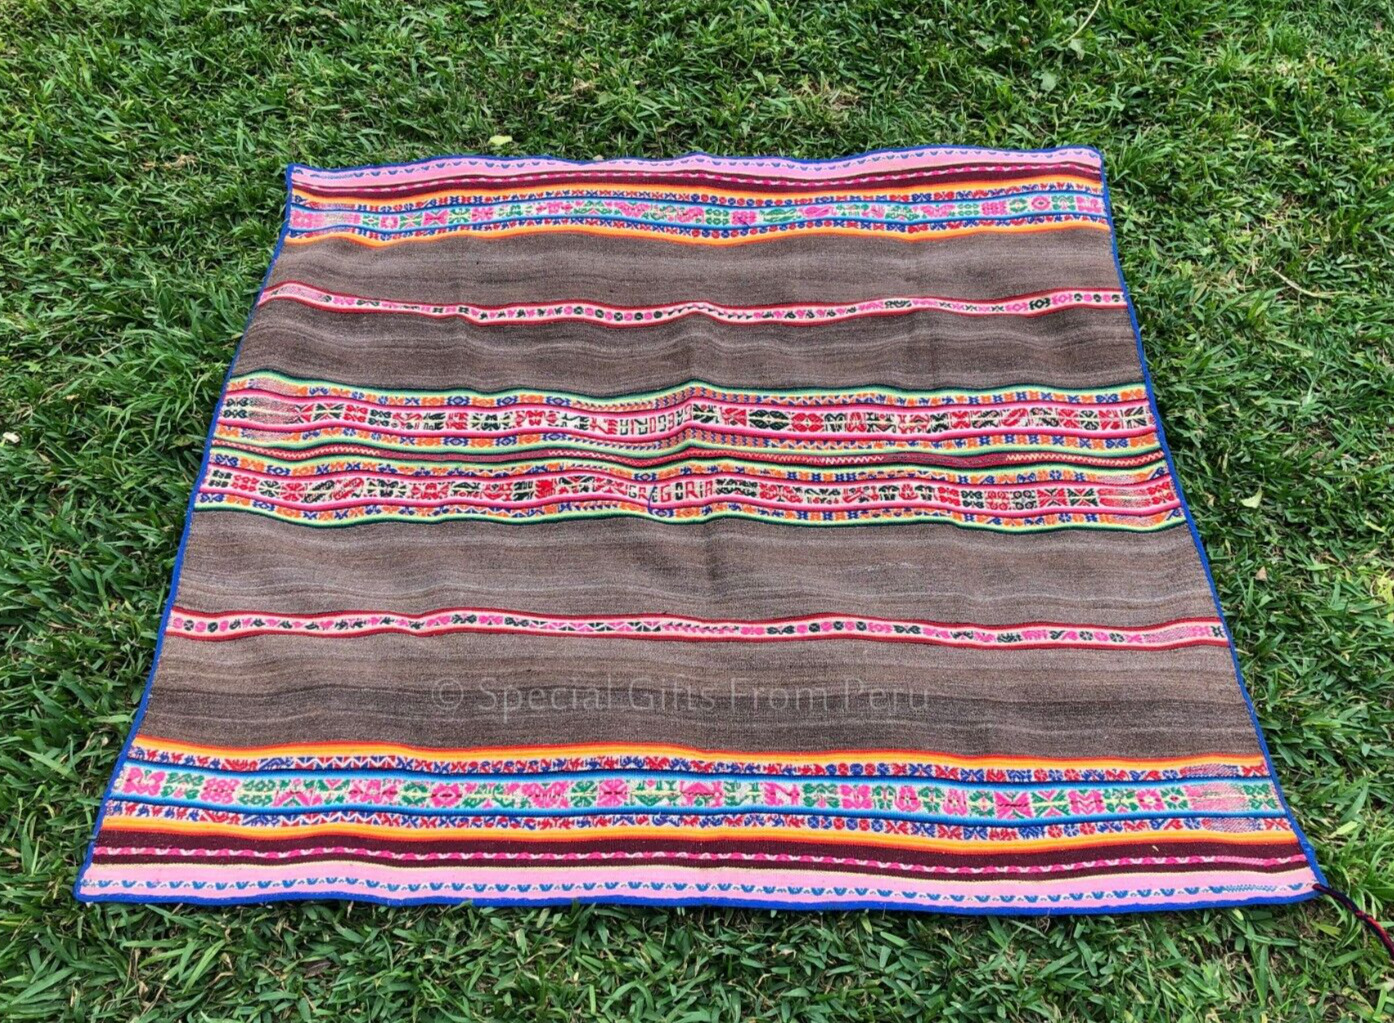 Unique Handwoven Bohemian Beauty: Handwoven Blanket for a Stylish Home Retreat